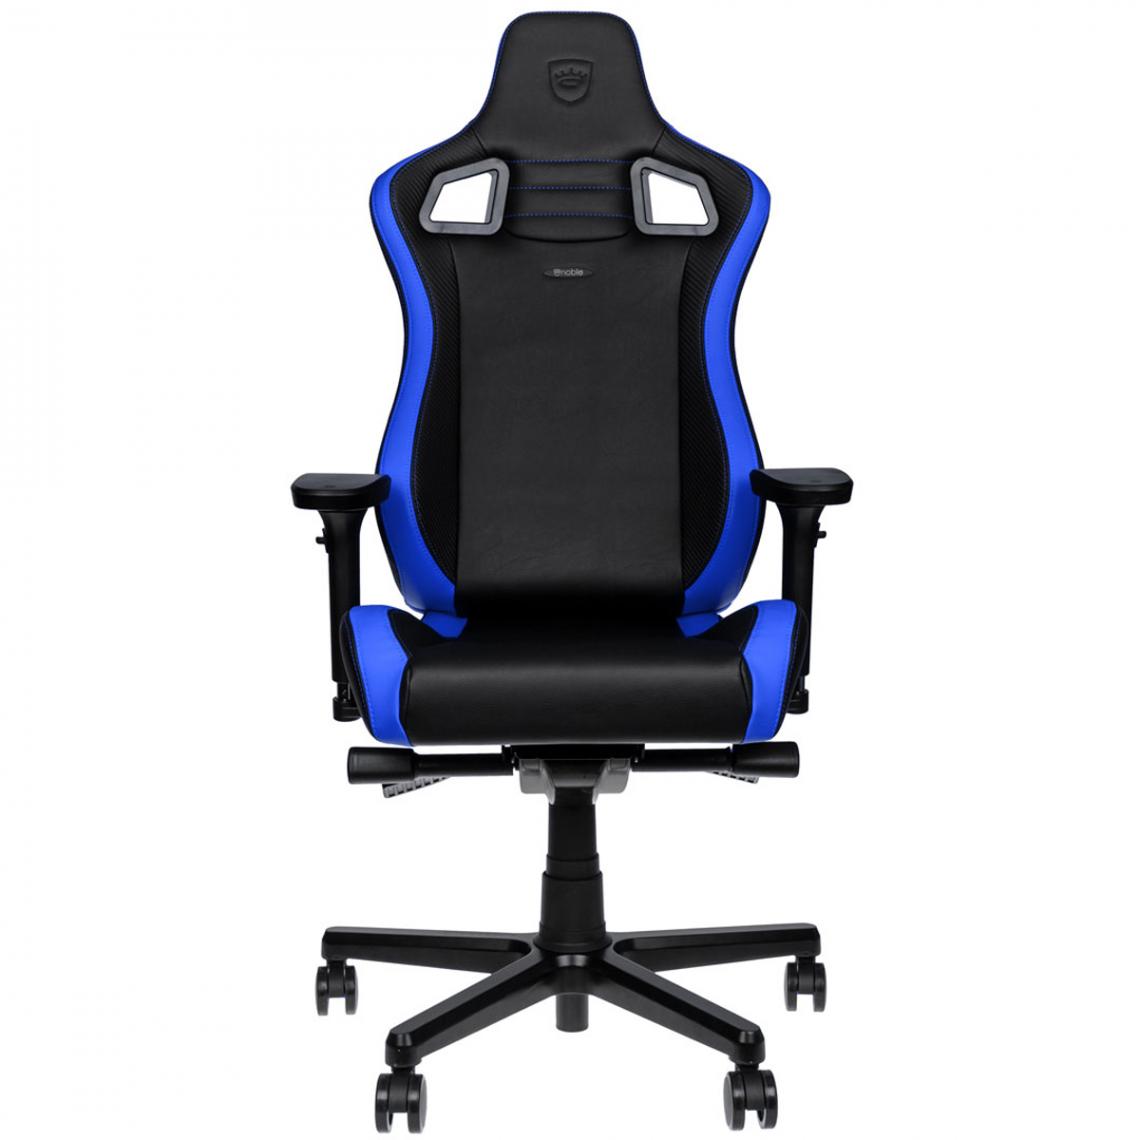 Noblechairs - Noblechairs EPIC Compact gaming - Bleu - Chaise gamer